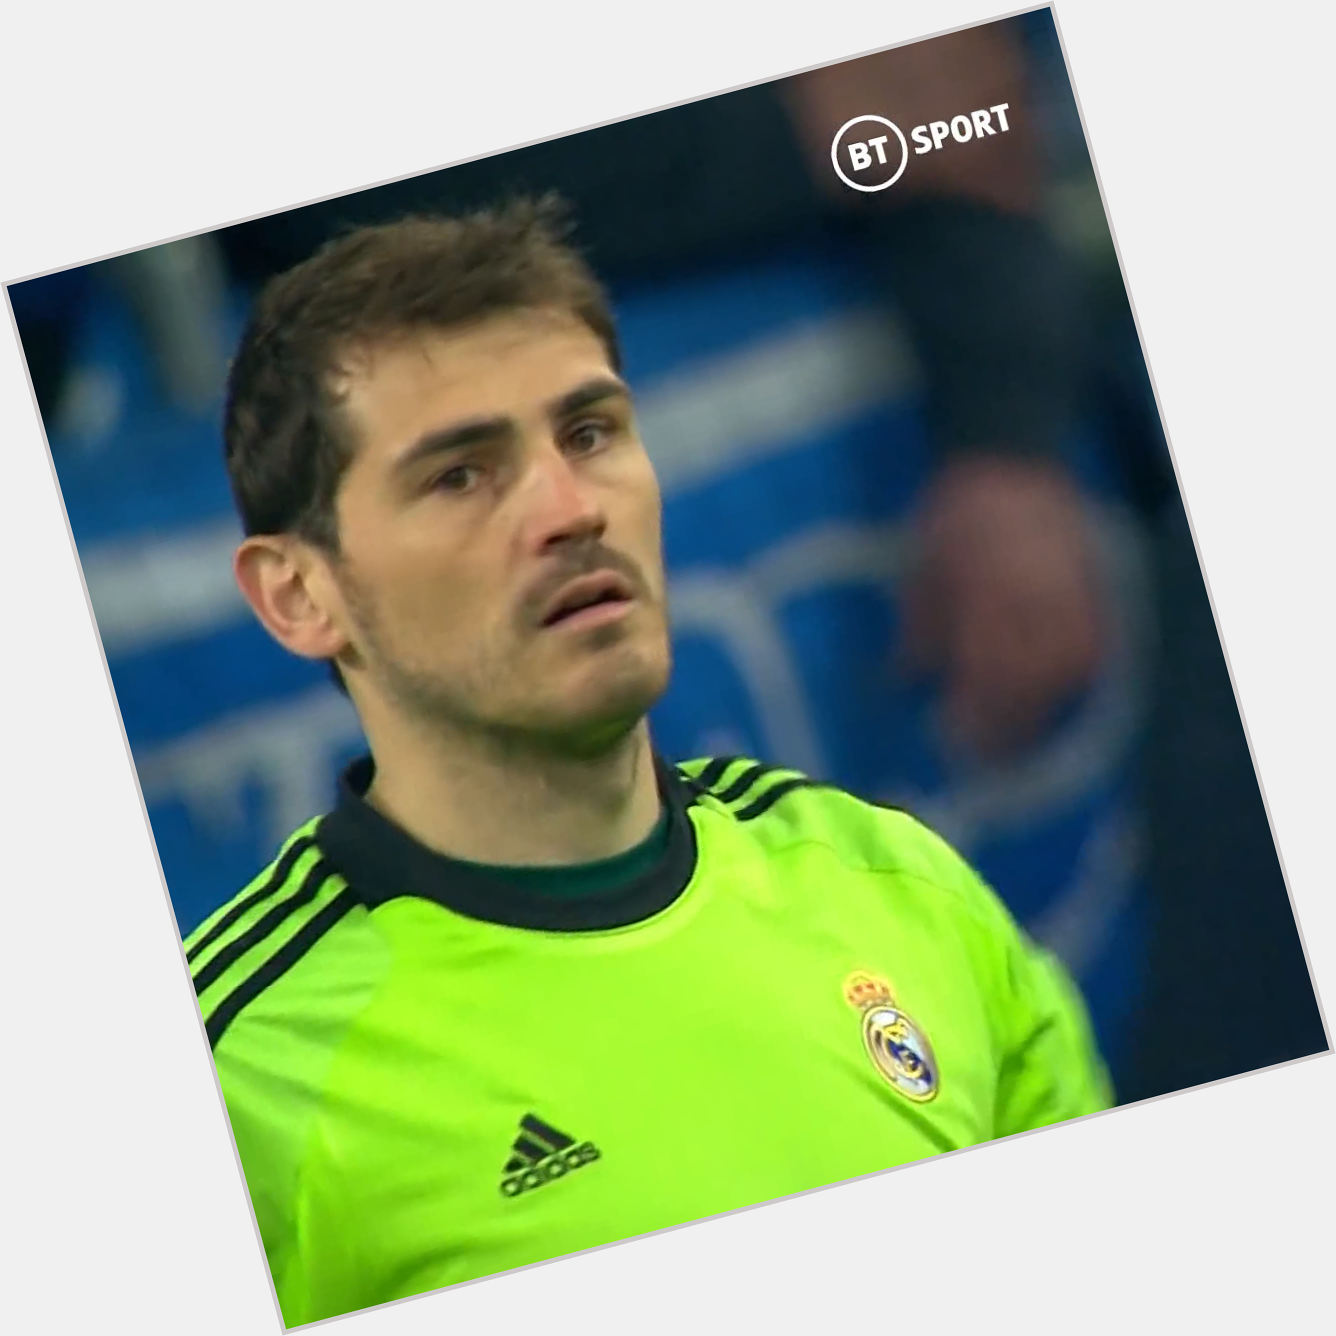 Happy Birthday to the one and only Iker Casillas 